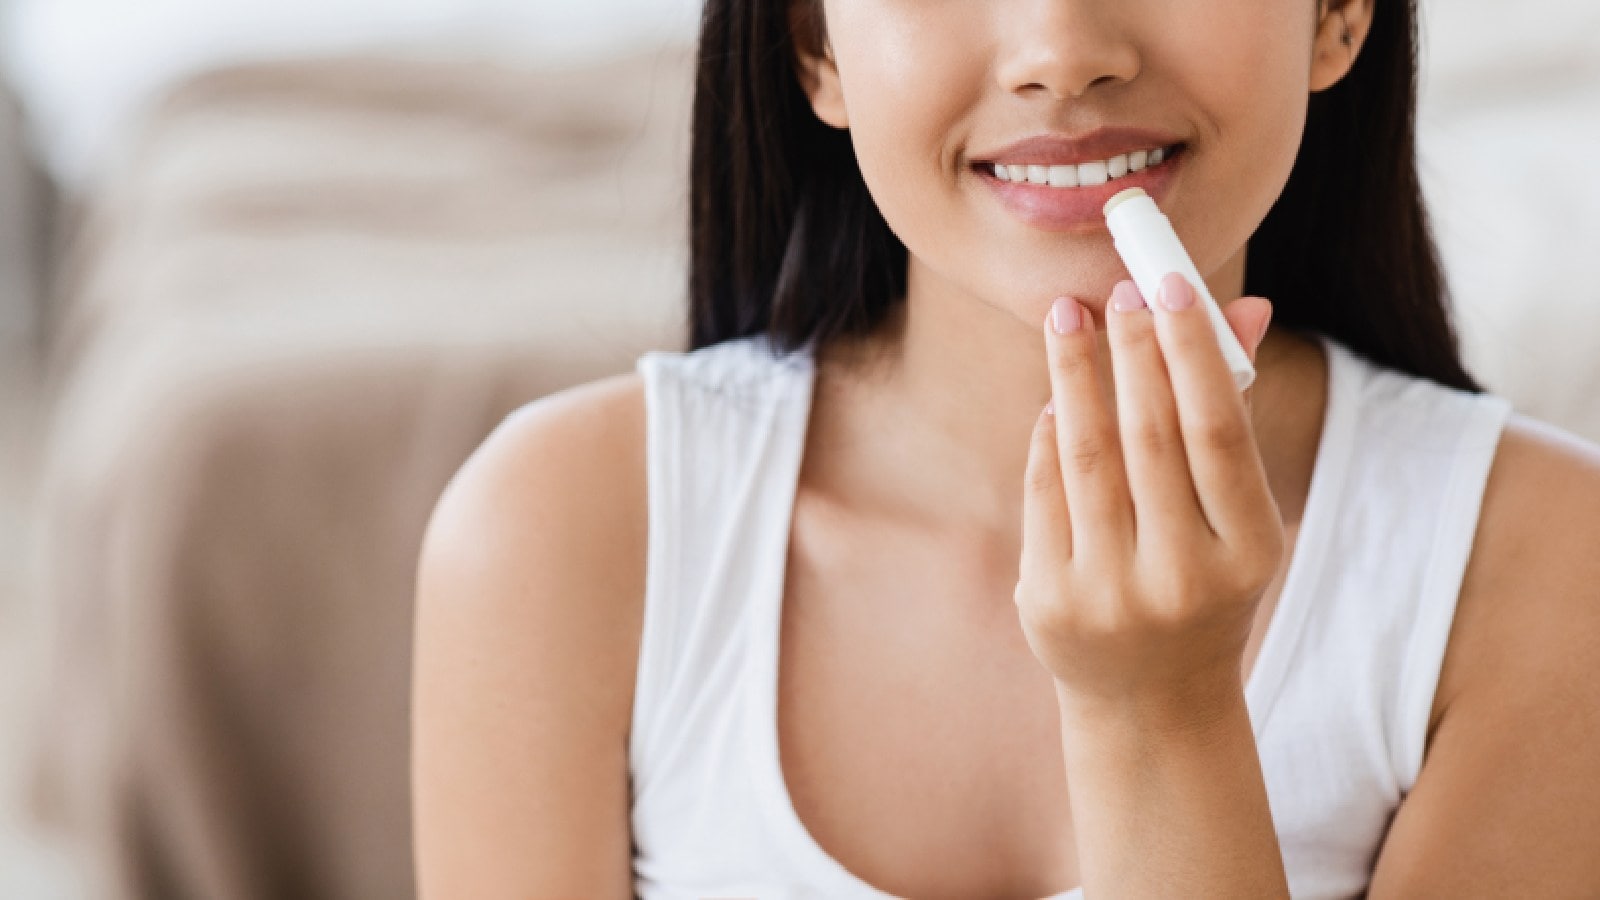 Lip balms for chapped lips: Bid adieu to dry and dehydrated lips